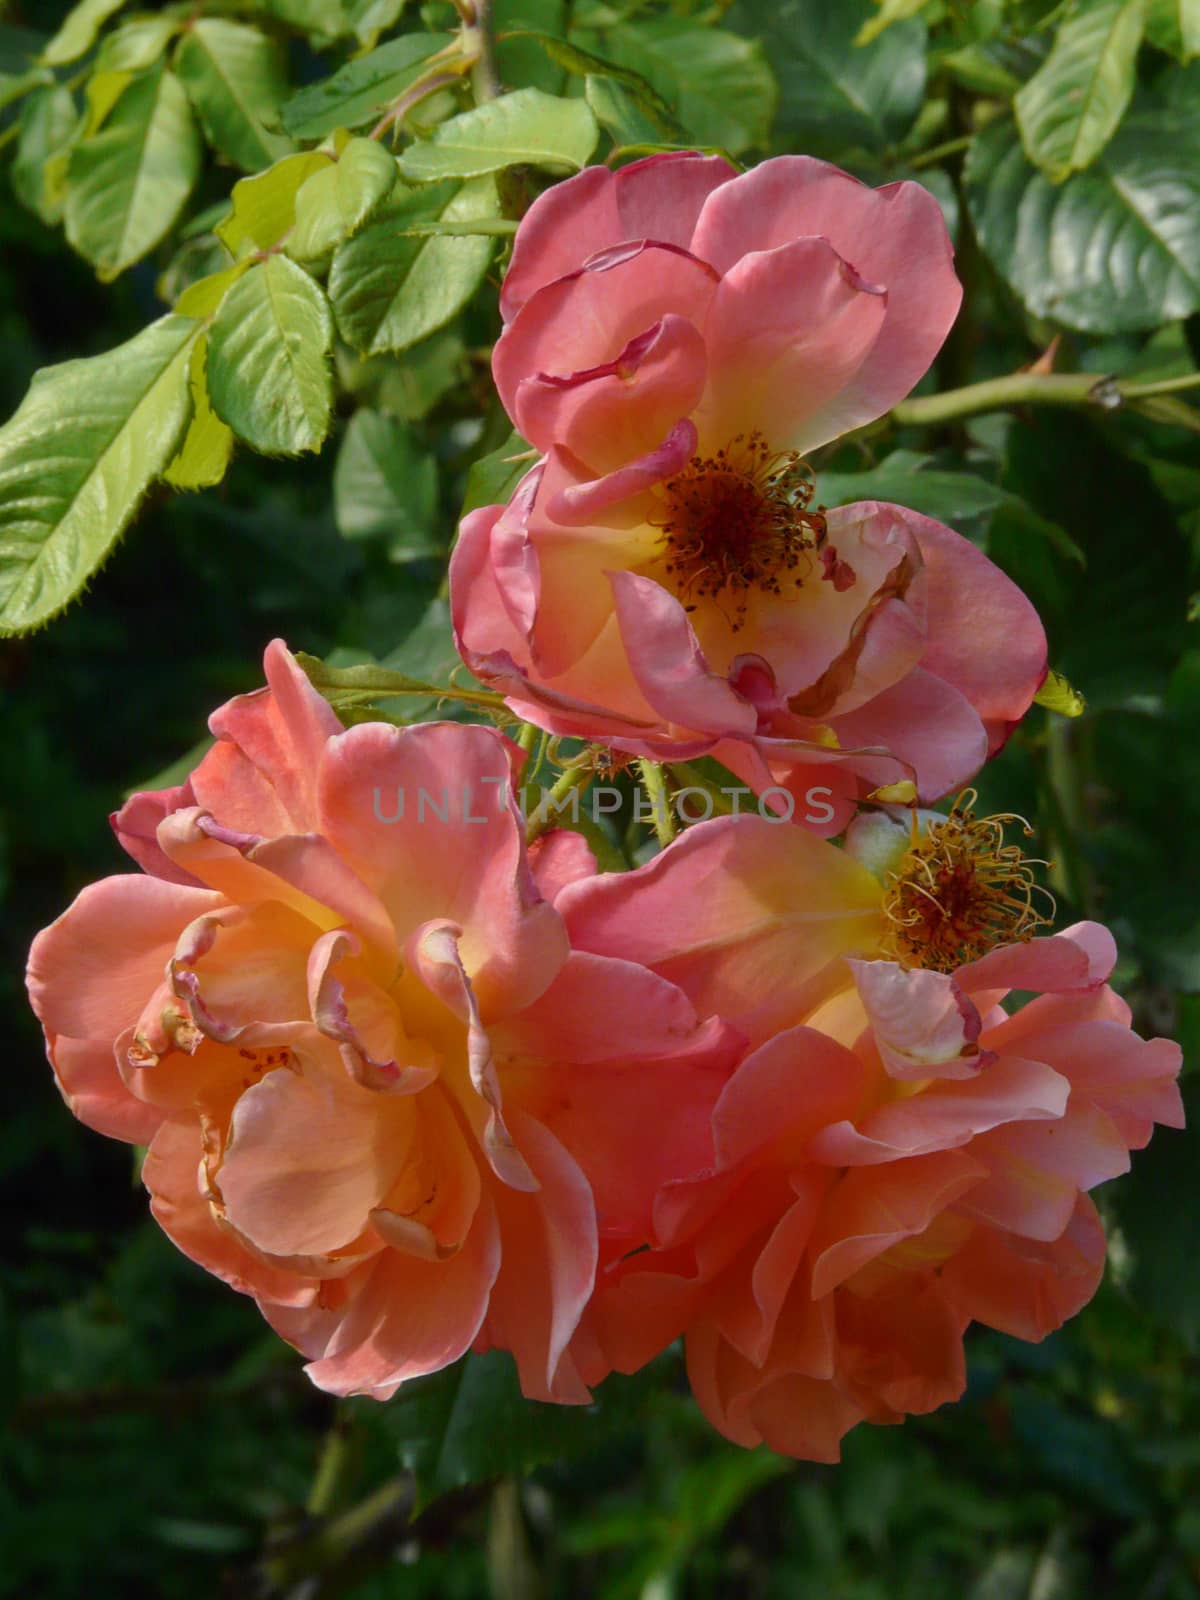 three budding flower roses of a gentle-peach color with fallen petals against the background of green leaves